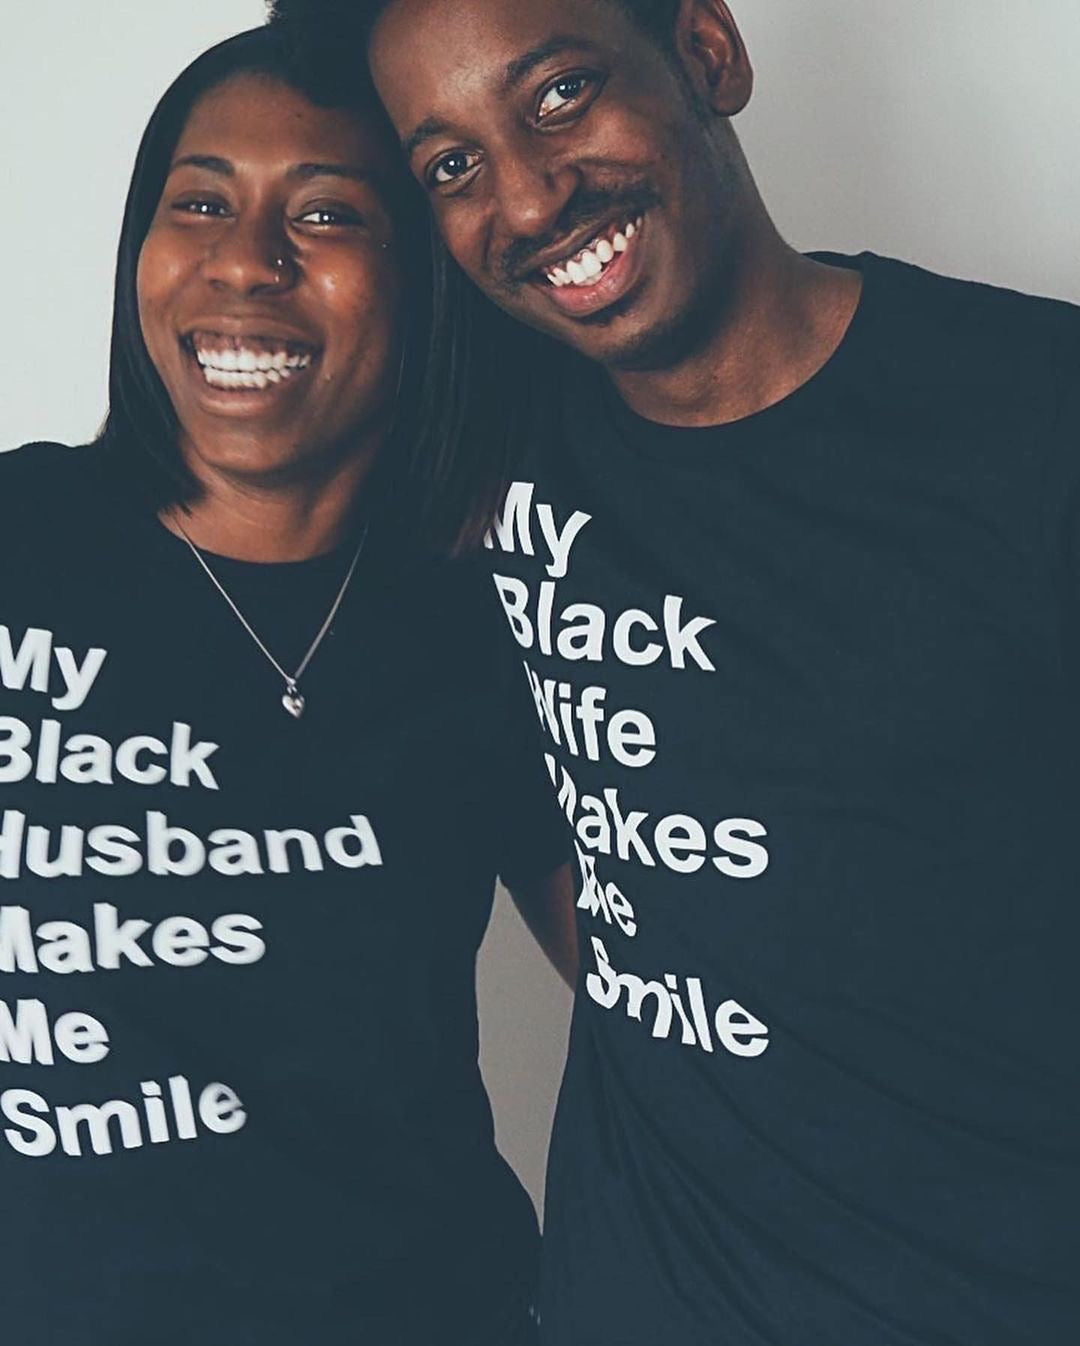 My Black Husband Makes Me Smile (T-Shirt)(Fitted or Unisex)